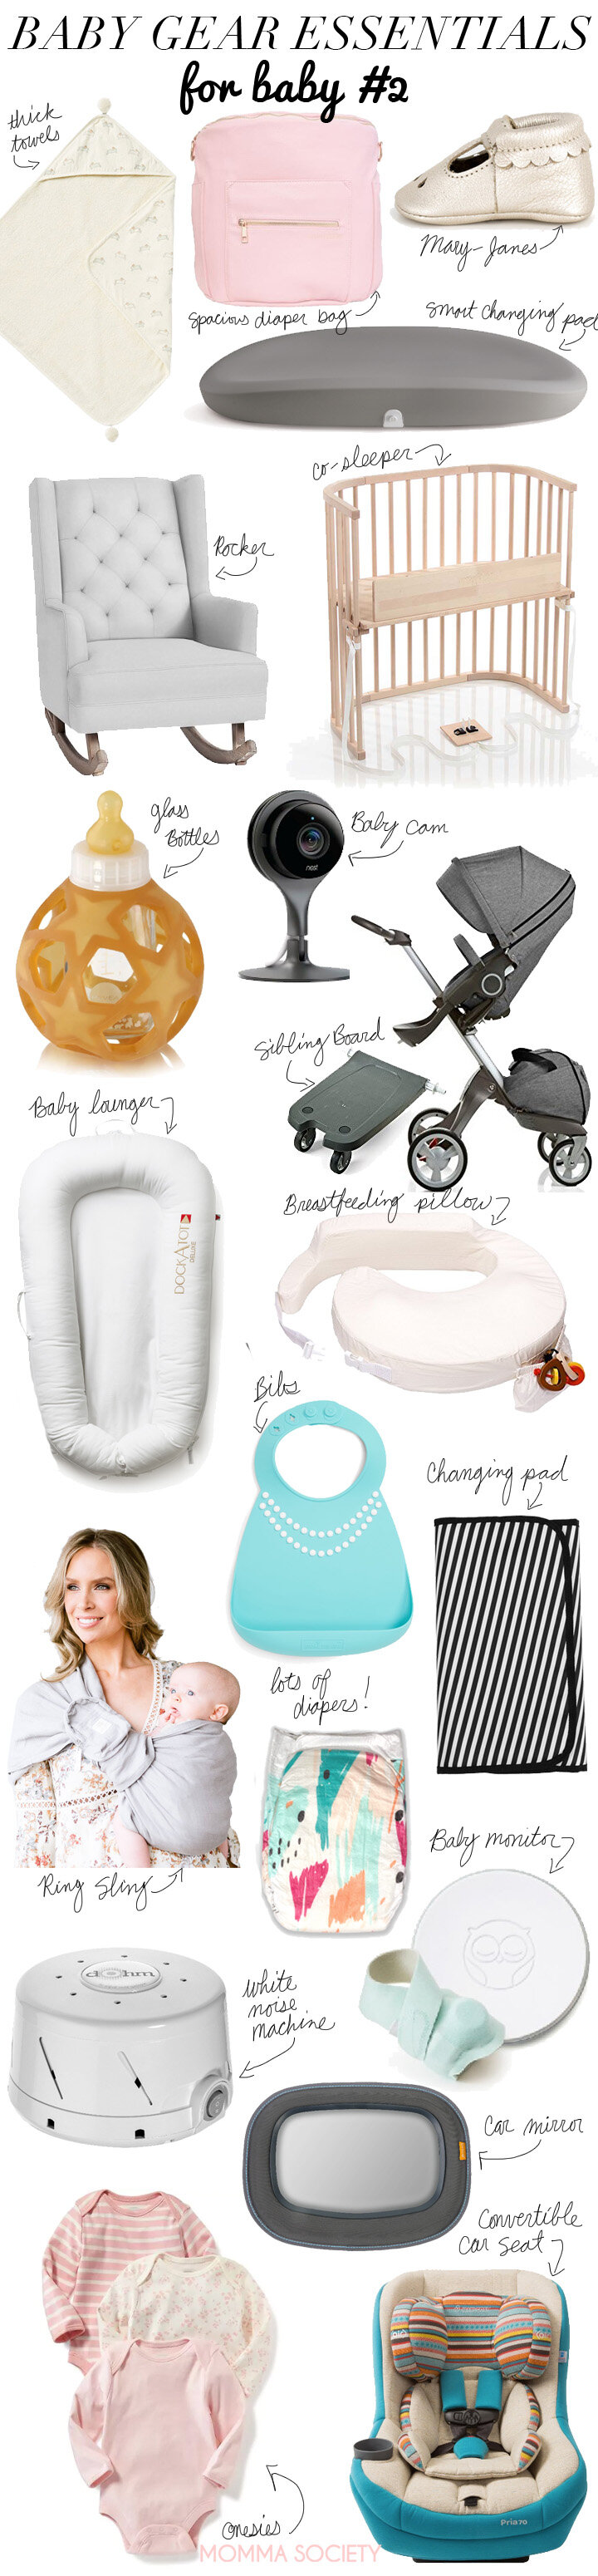 What You Need for Second Baby: Registry Guide and Must-Haves